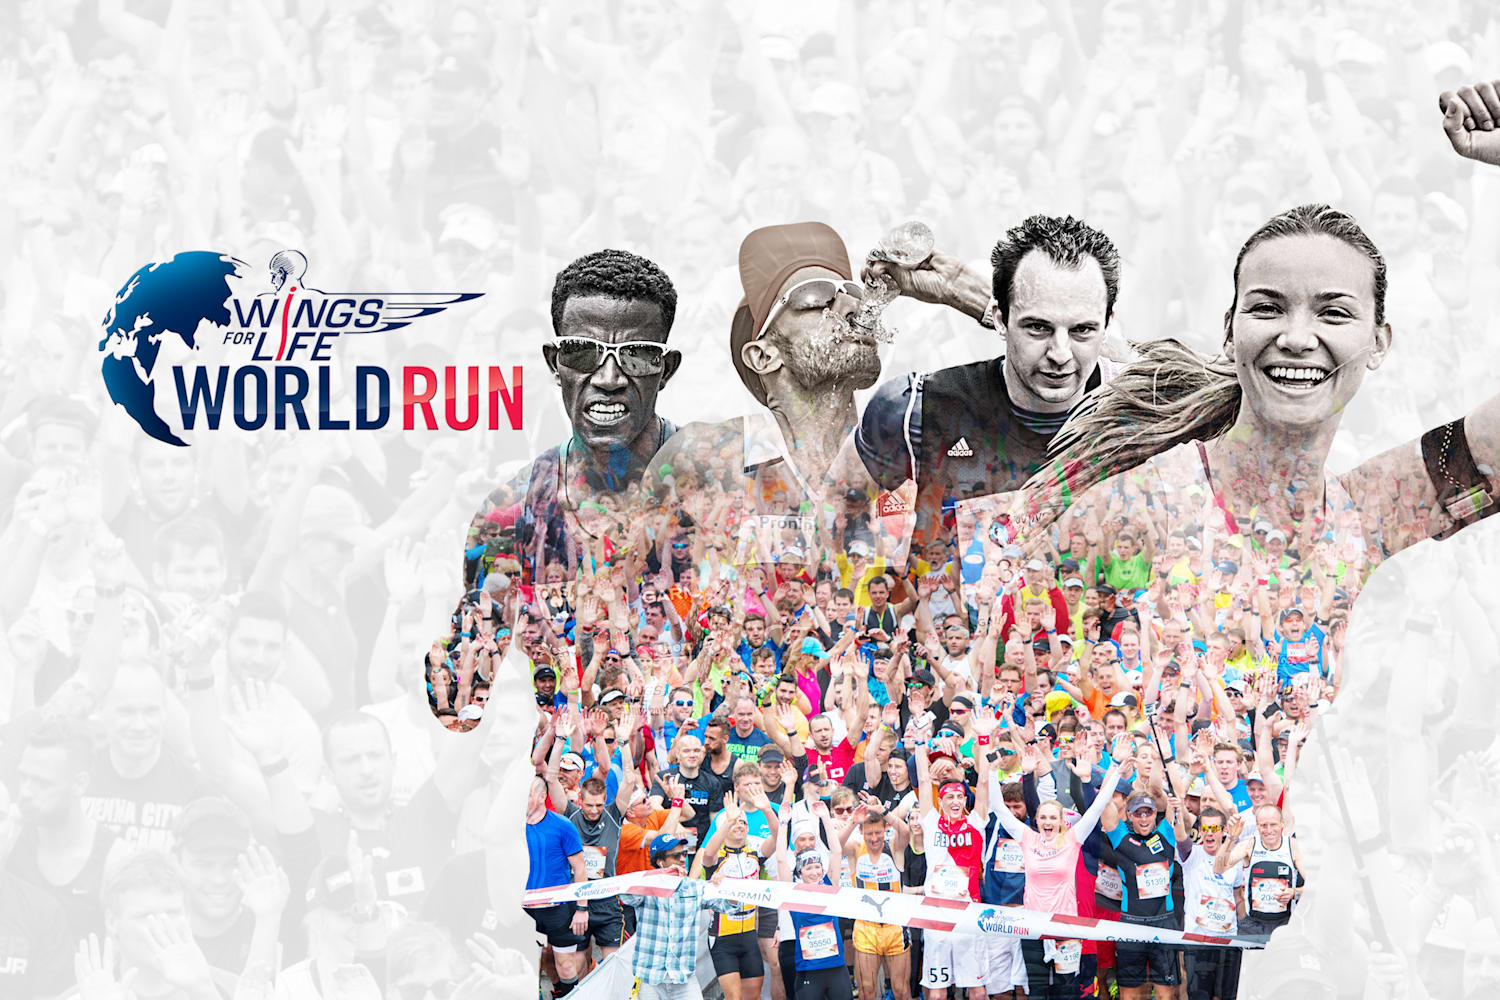 Wings for Life World Run event info & videos